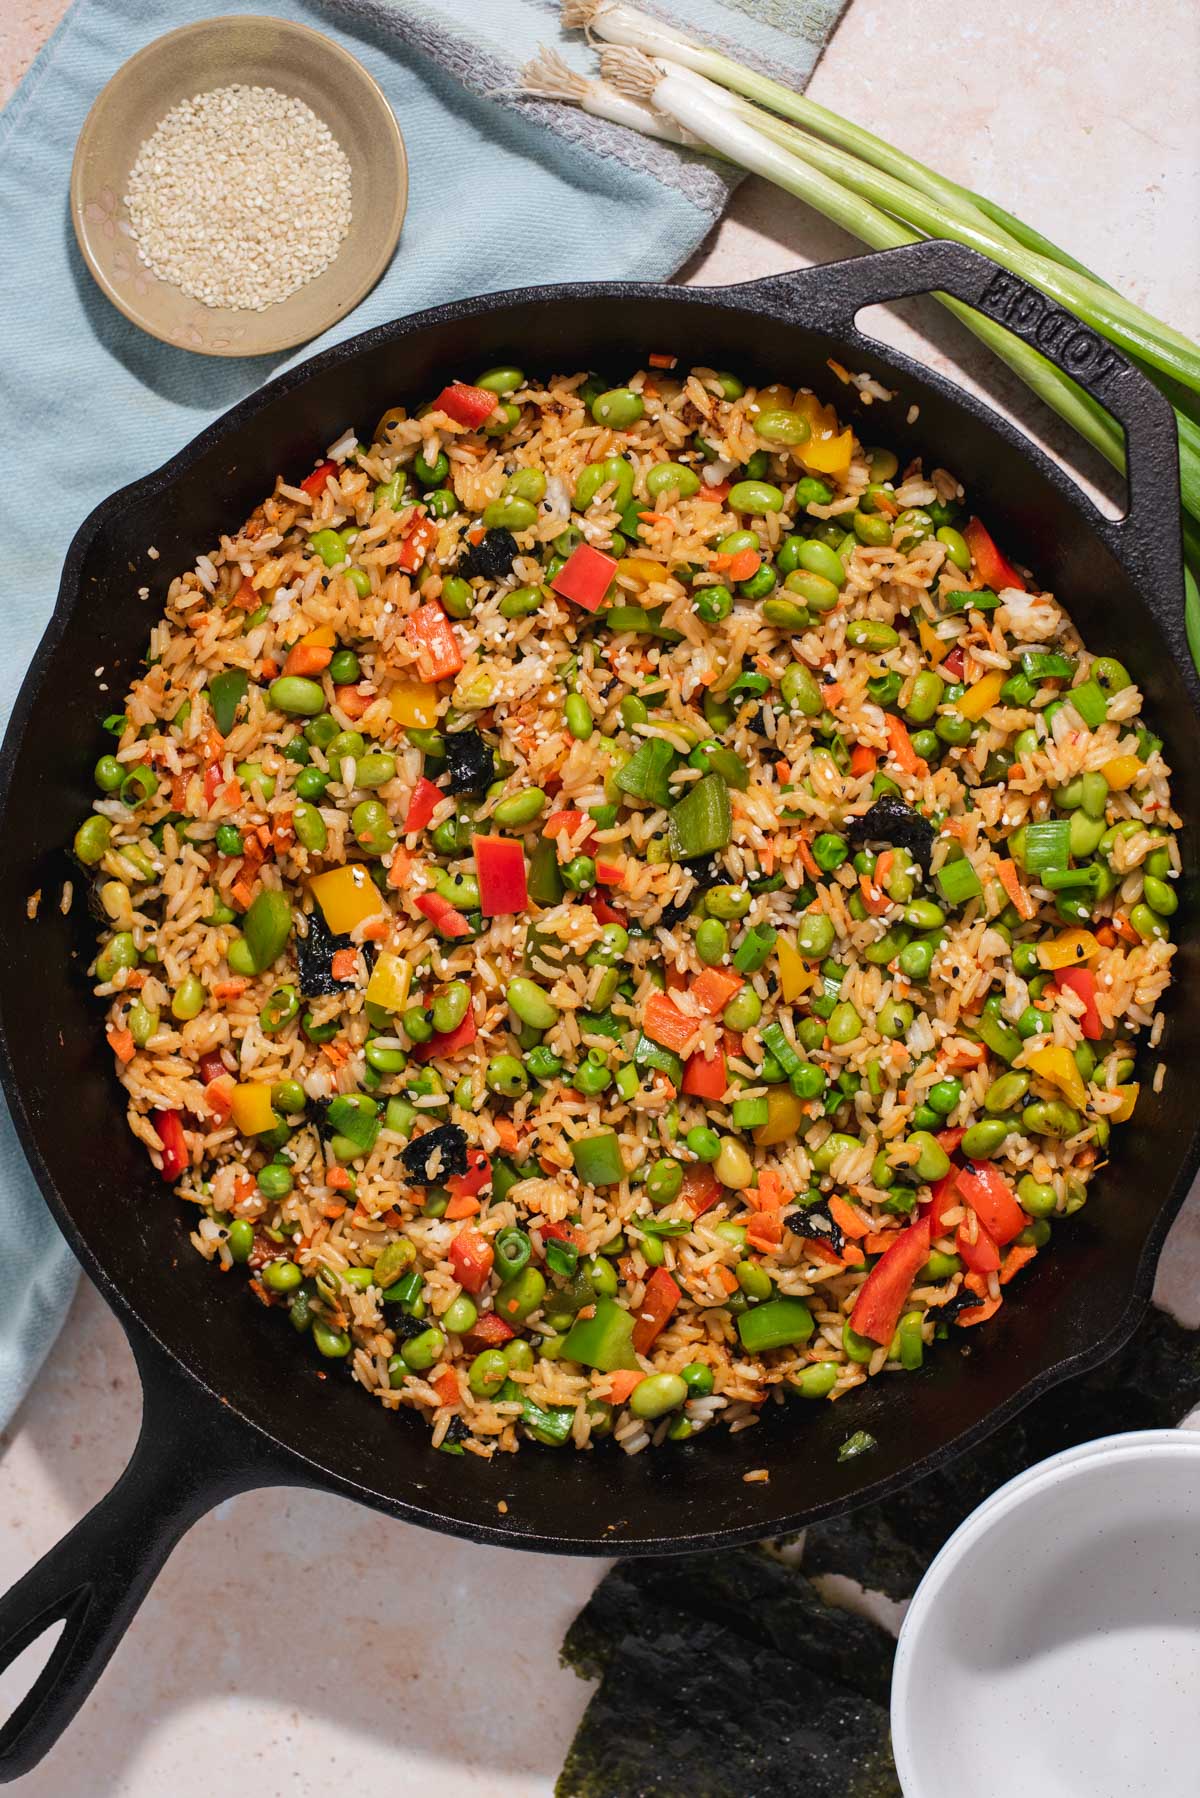 Fried rice with vegetables in a cast iron skillet